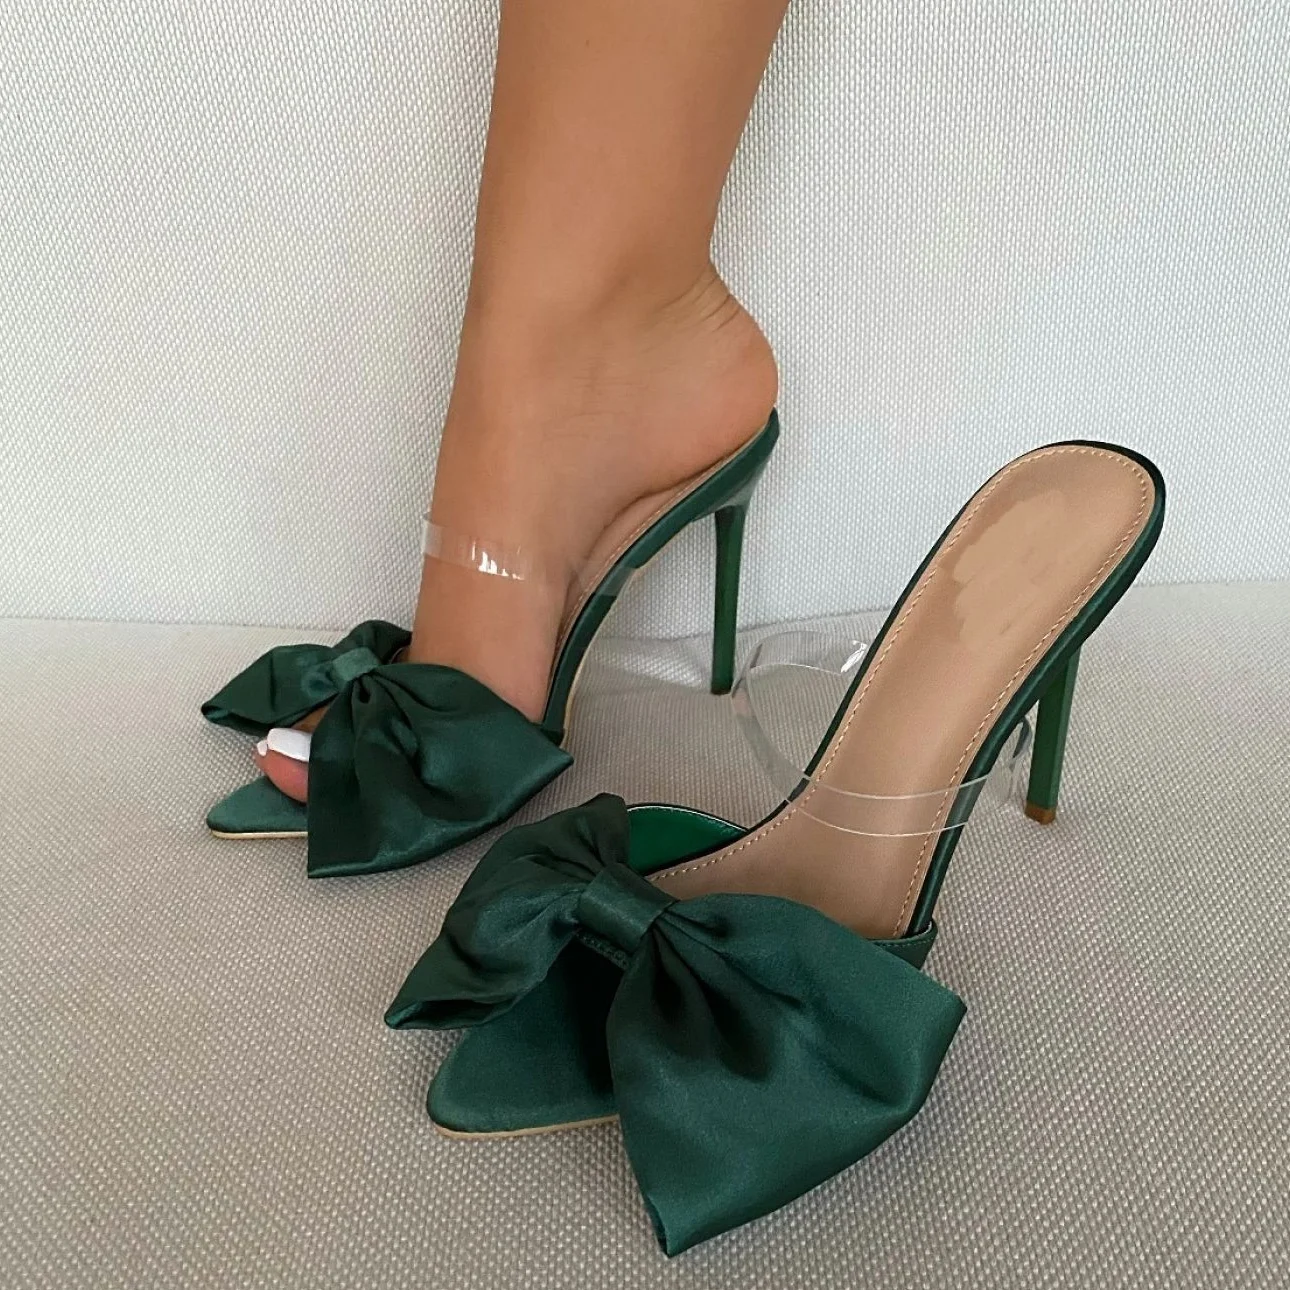 

New Style Large Bow-tie Band Solid Thin High Heel Cheap Women Sandals Pointed Peep Toe Slip-on Summer Slides Shoes For Ladies, Black,green